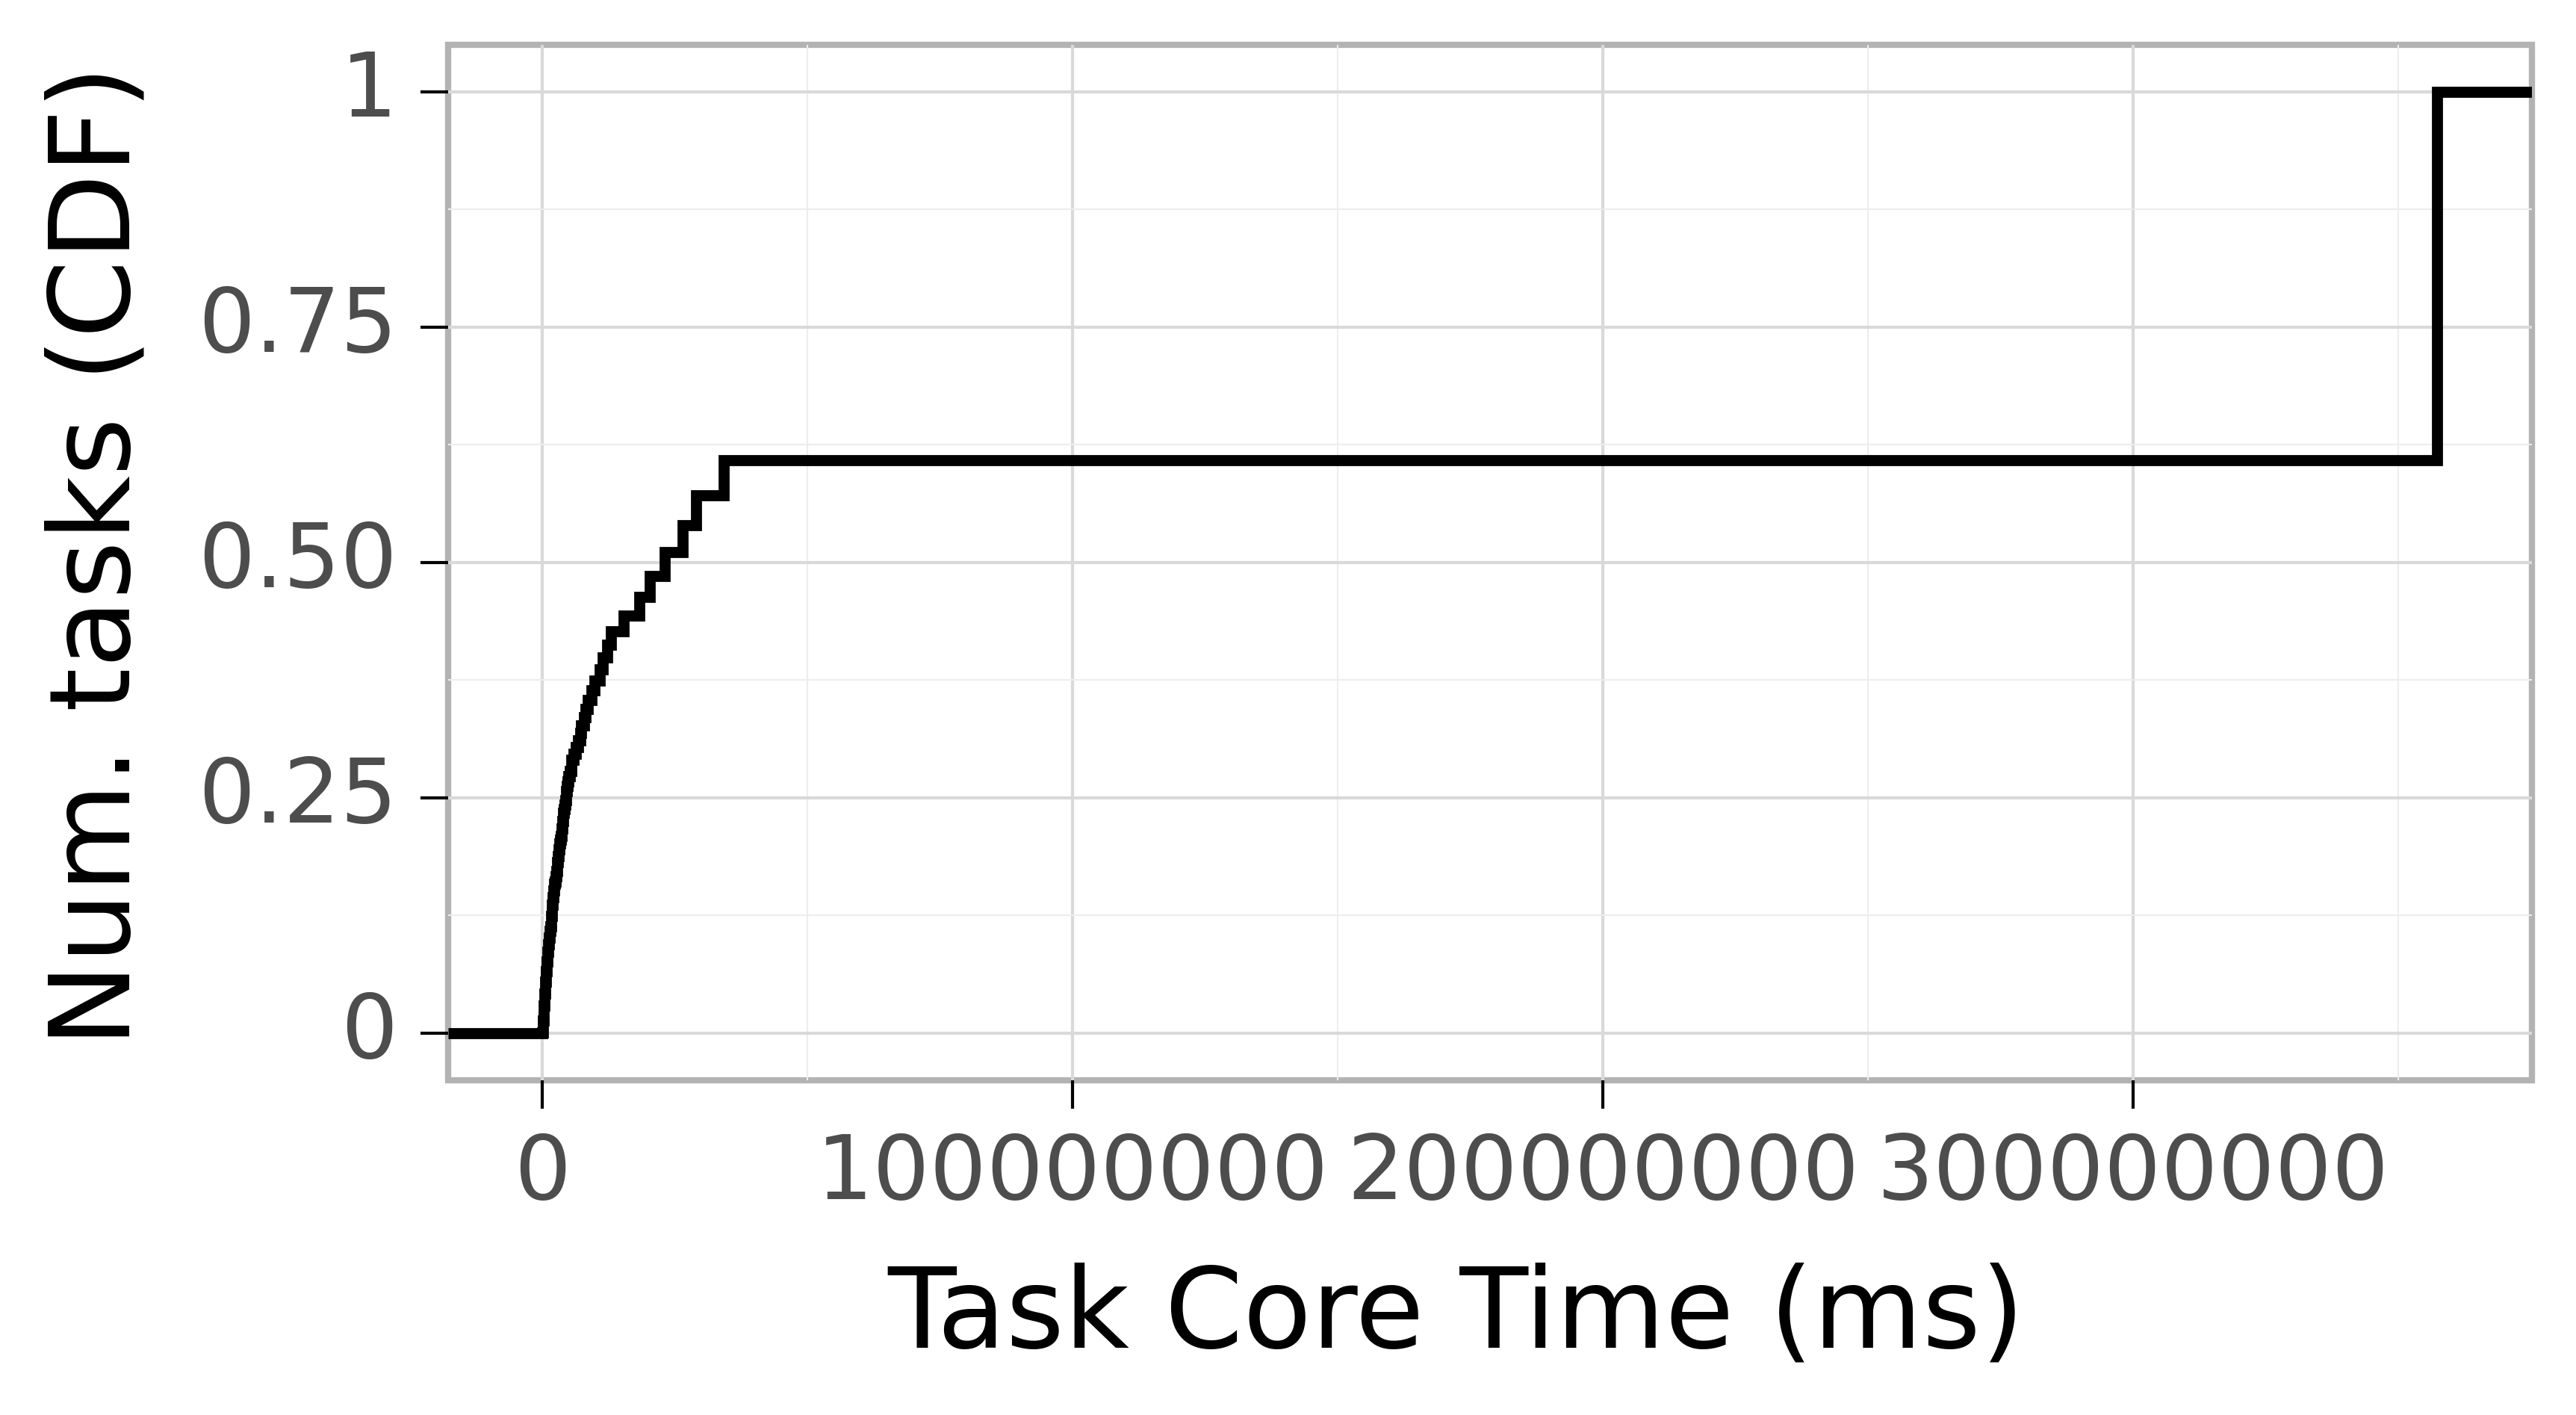 task resource time CDF graph for the Galaxy trace.